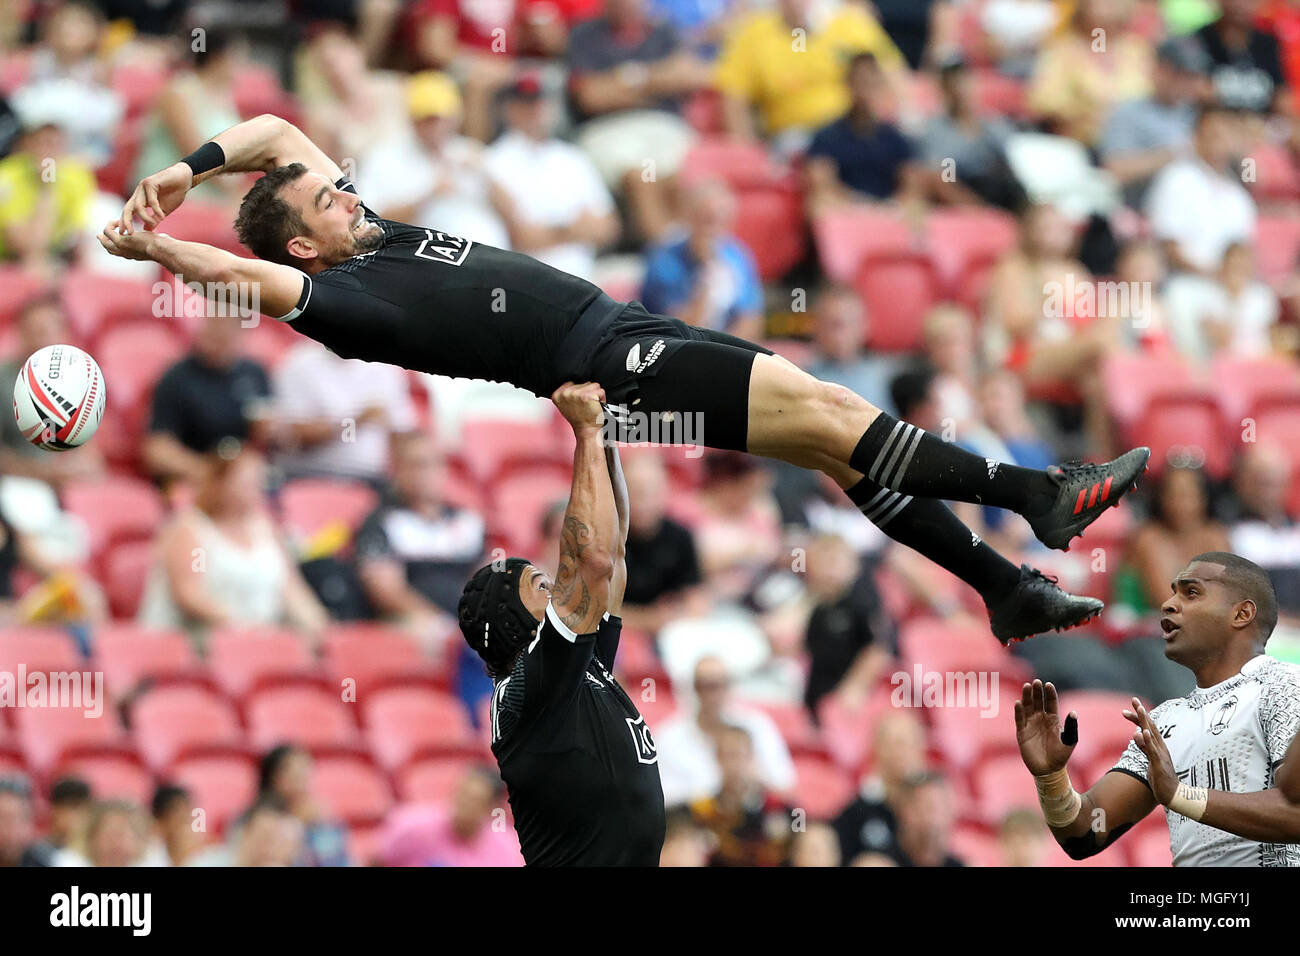 Singapore. 29th Apr, 2018. Kurt Baker (left) of New Zealand misses the ball as he is lifted by Trael Joass (centre) during the Cup Quarter Final match between Fiji and New Zealand at the Rugby Sevens tournament at the National Stadium. Singapore. Credit: Paul Miller/ZUMA Wire/Alamy Live News Stock Photo